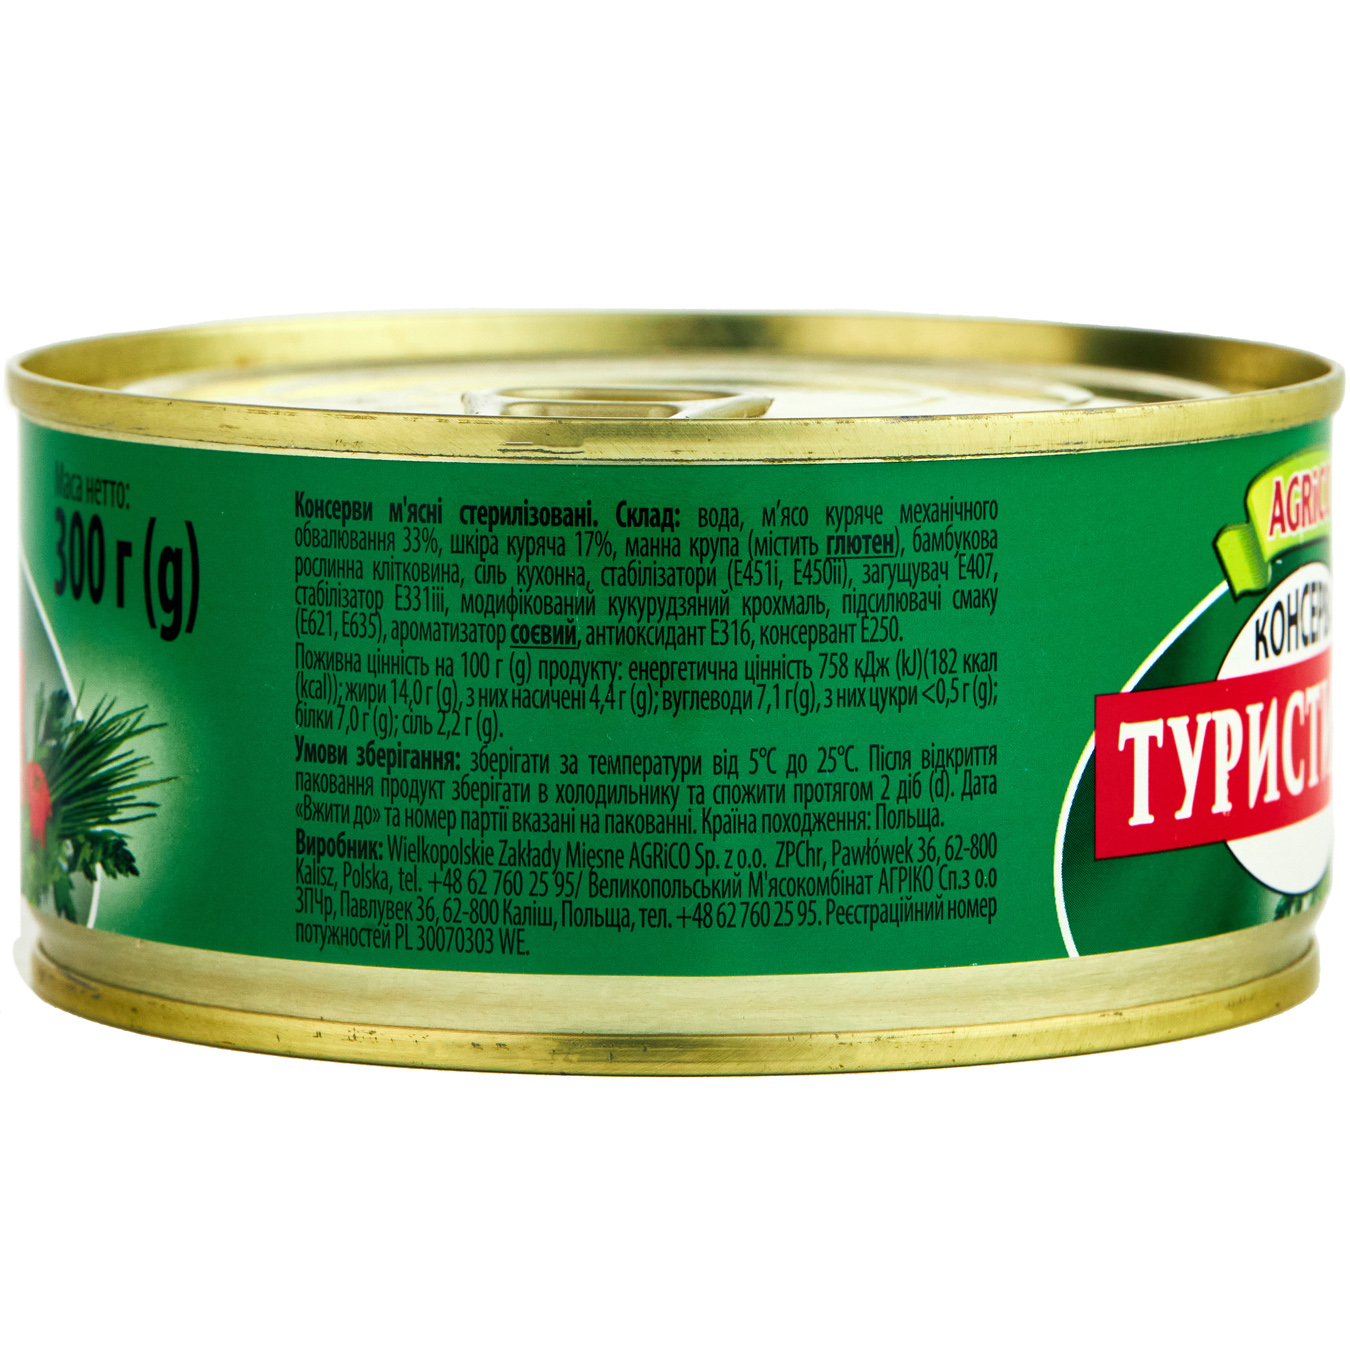 Agrico meat canned 300g 2